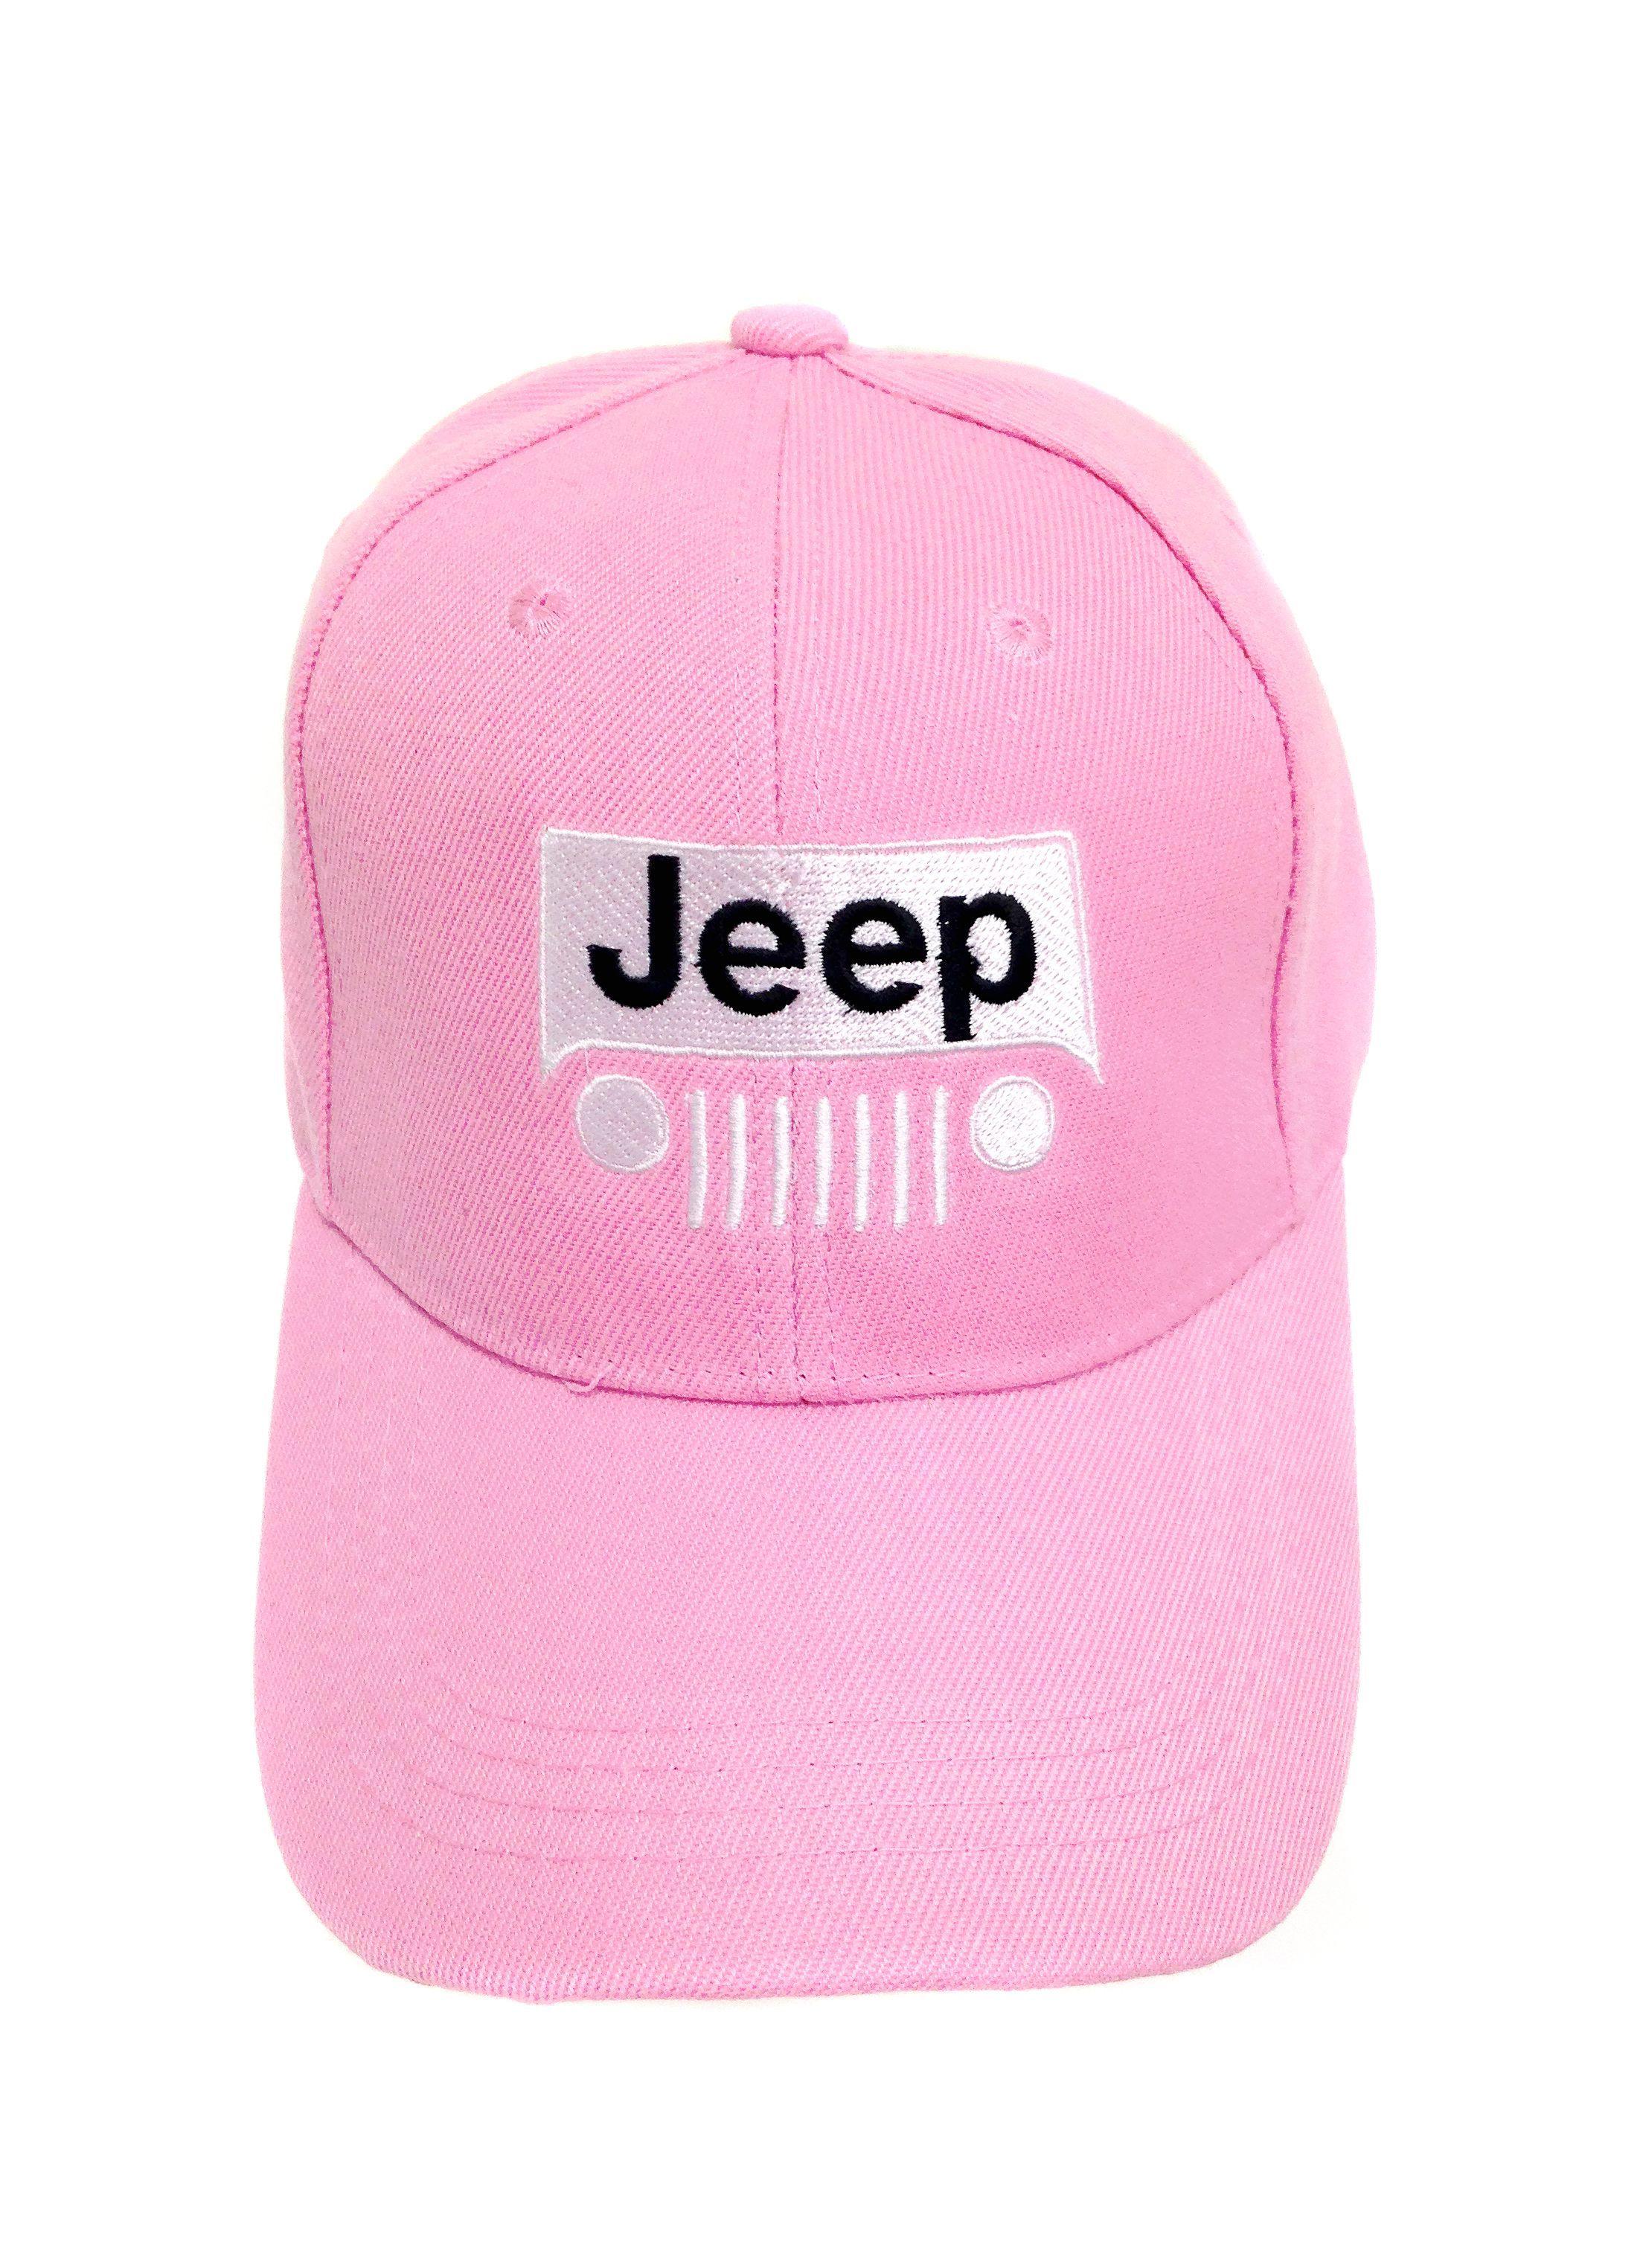 Jeep Grille Hat Logo - Women's Pink Jeep Grille Logo Cap | Accessories | Jeep, Pink jeep ...